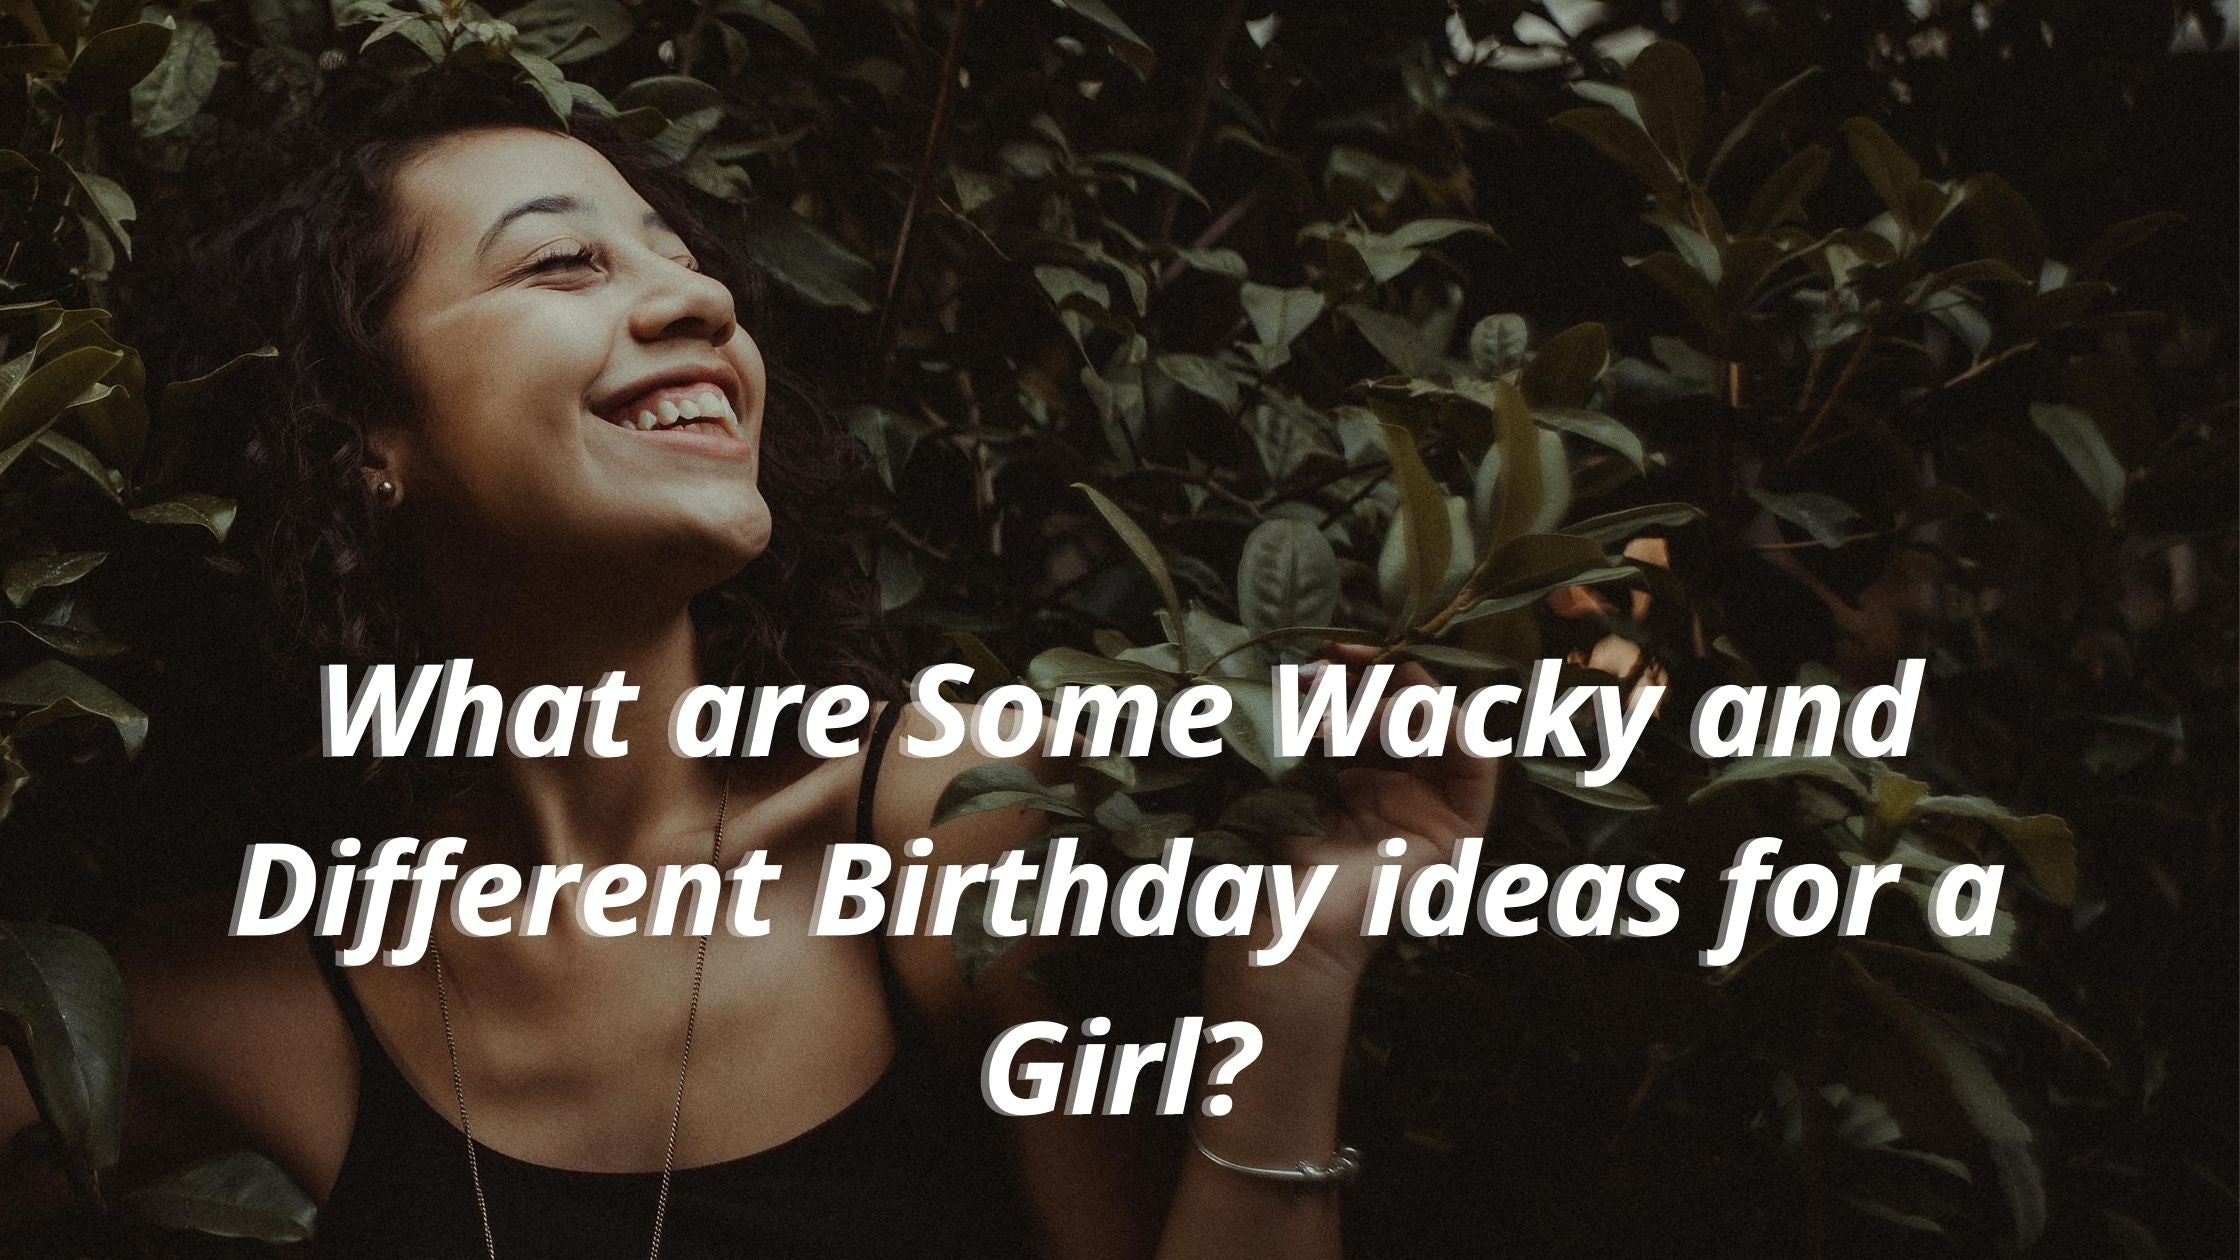 What are Some Wacky and Different Birthday ideas for a Girl?